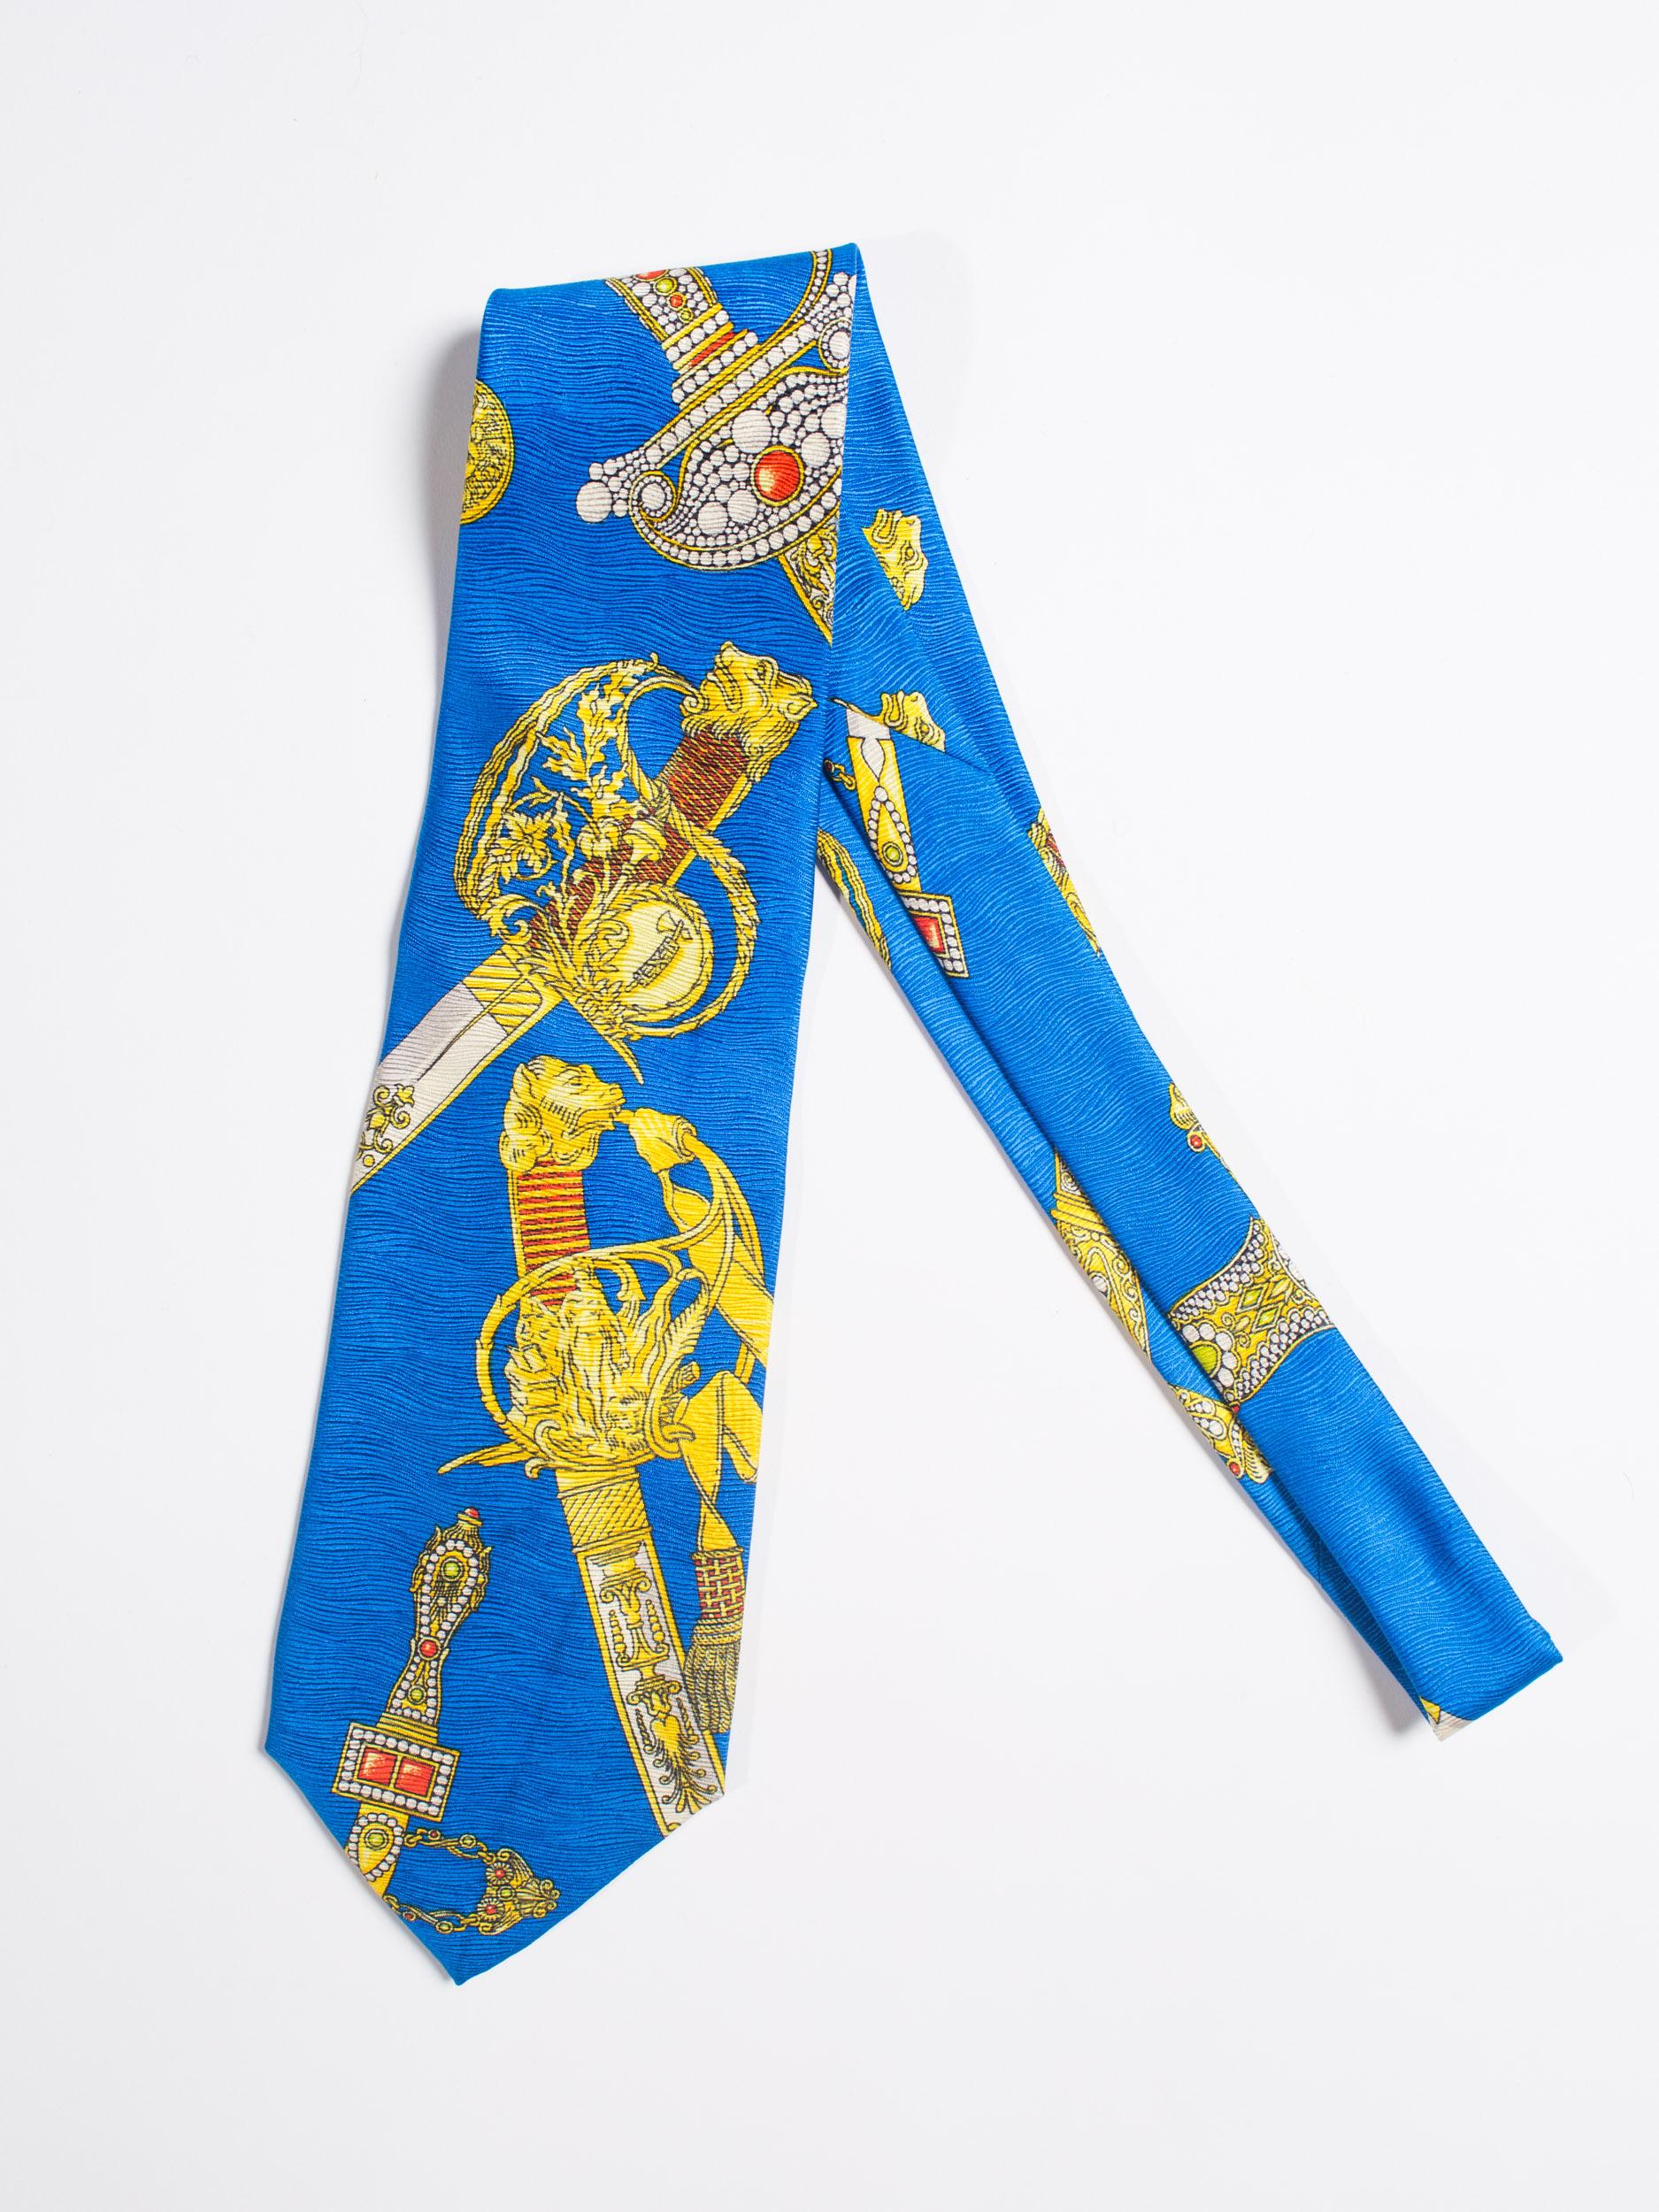 1990s Gianni Versace Bright Blue Mens Silk Tie With Gold Swords 5